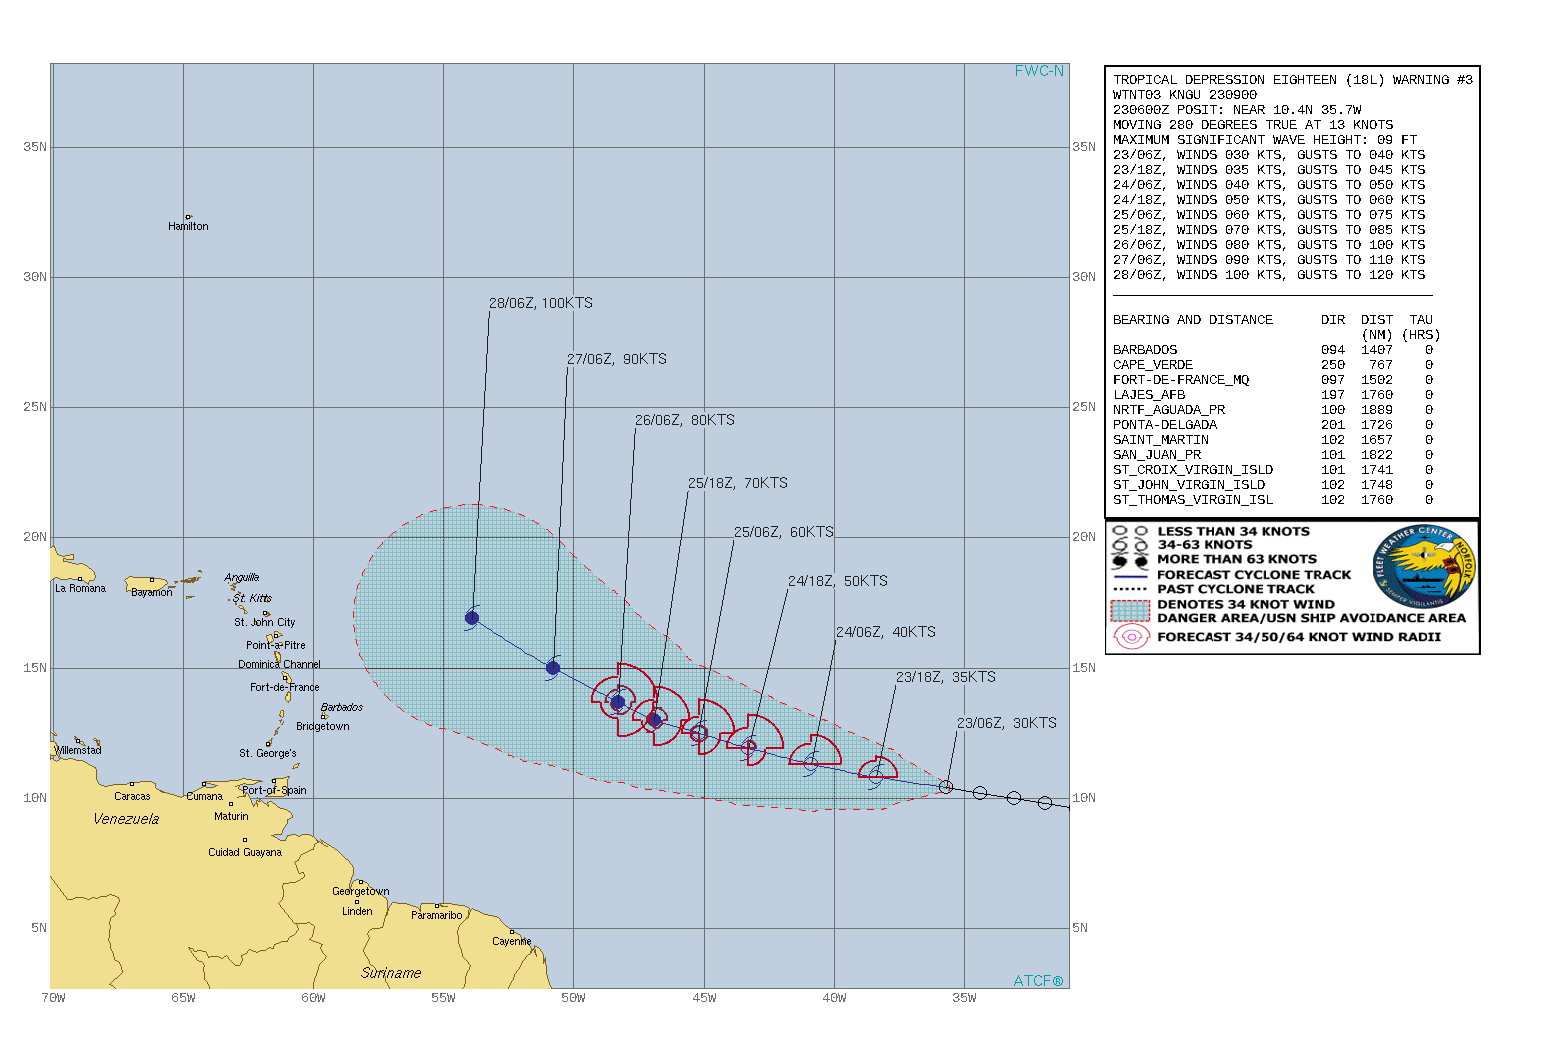 TD 18L. WARNING 3 ISSUED AT 23/09UTC. CUREENT INTENSITY IS 30KNOTS AND IS FORECAST TO REACH 70KNOTS/CAT 1 BY 25/18UTC AND 100KNOTS/CAT 3 BY 28/06UTC.